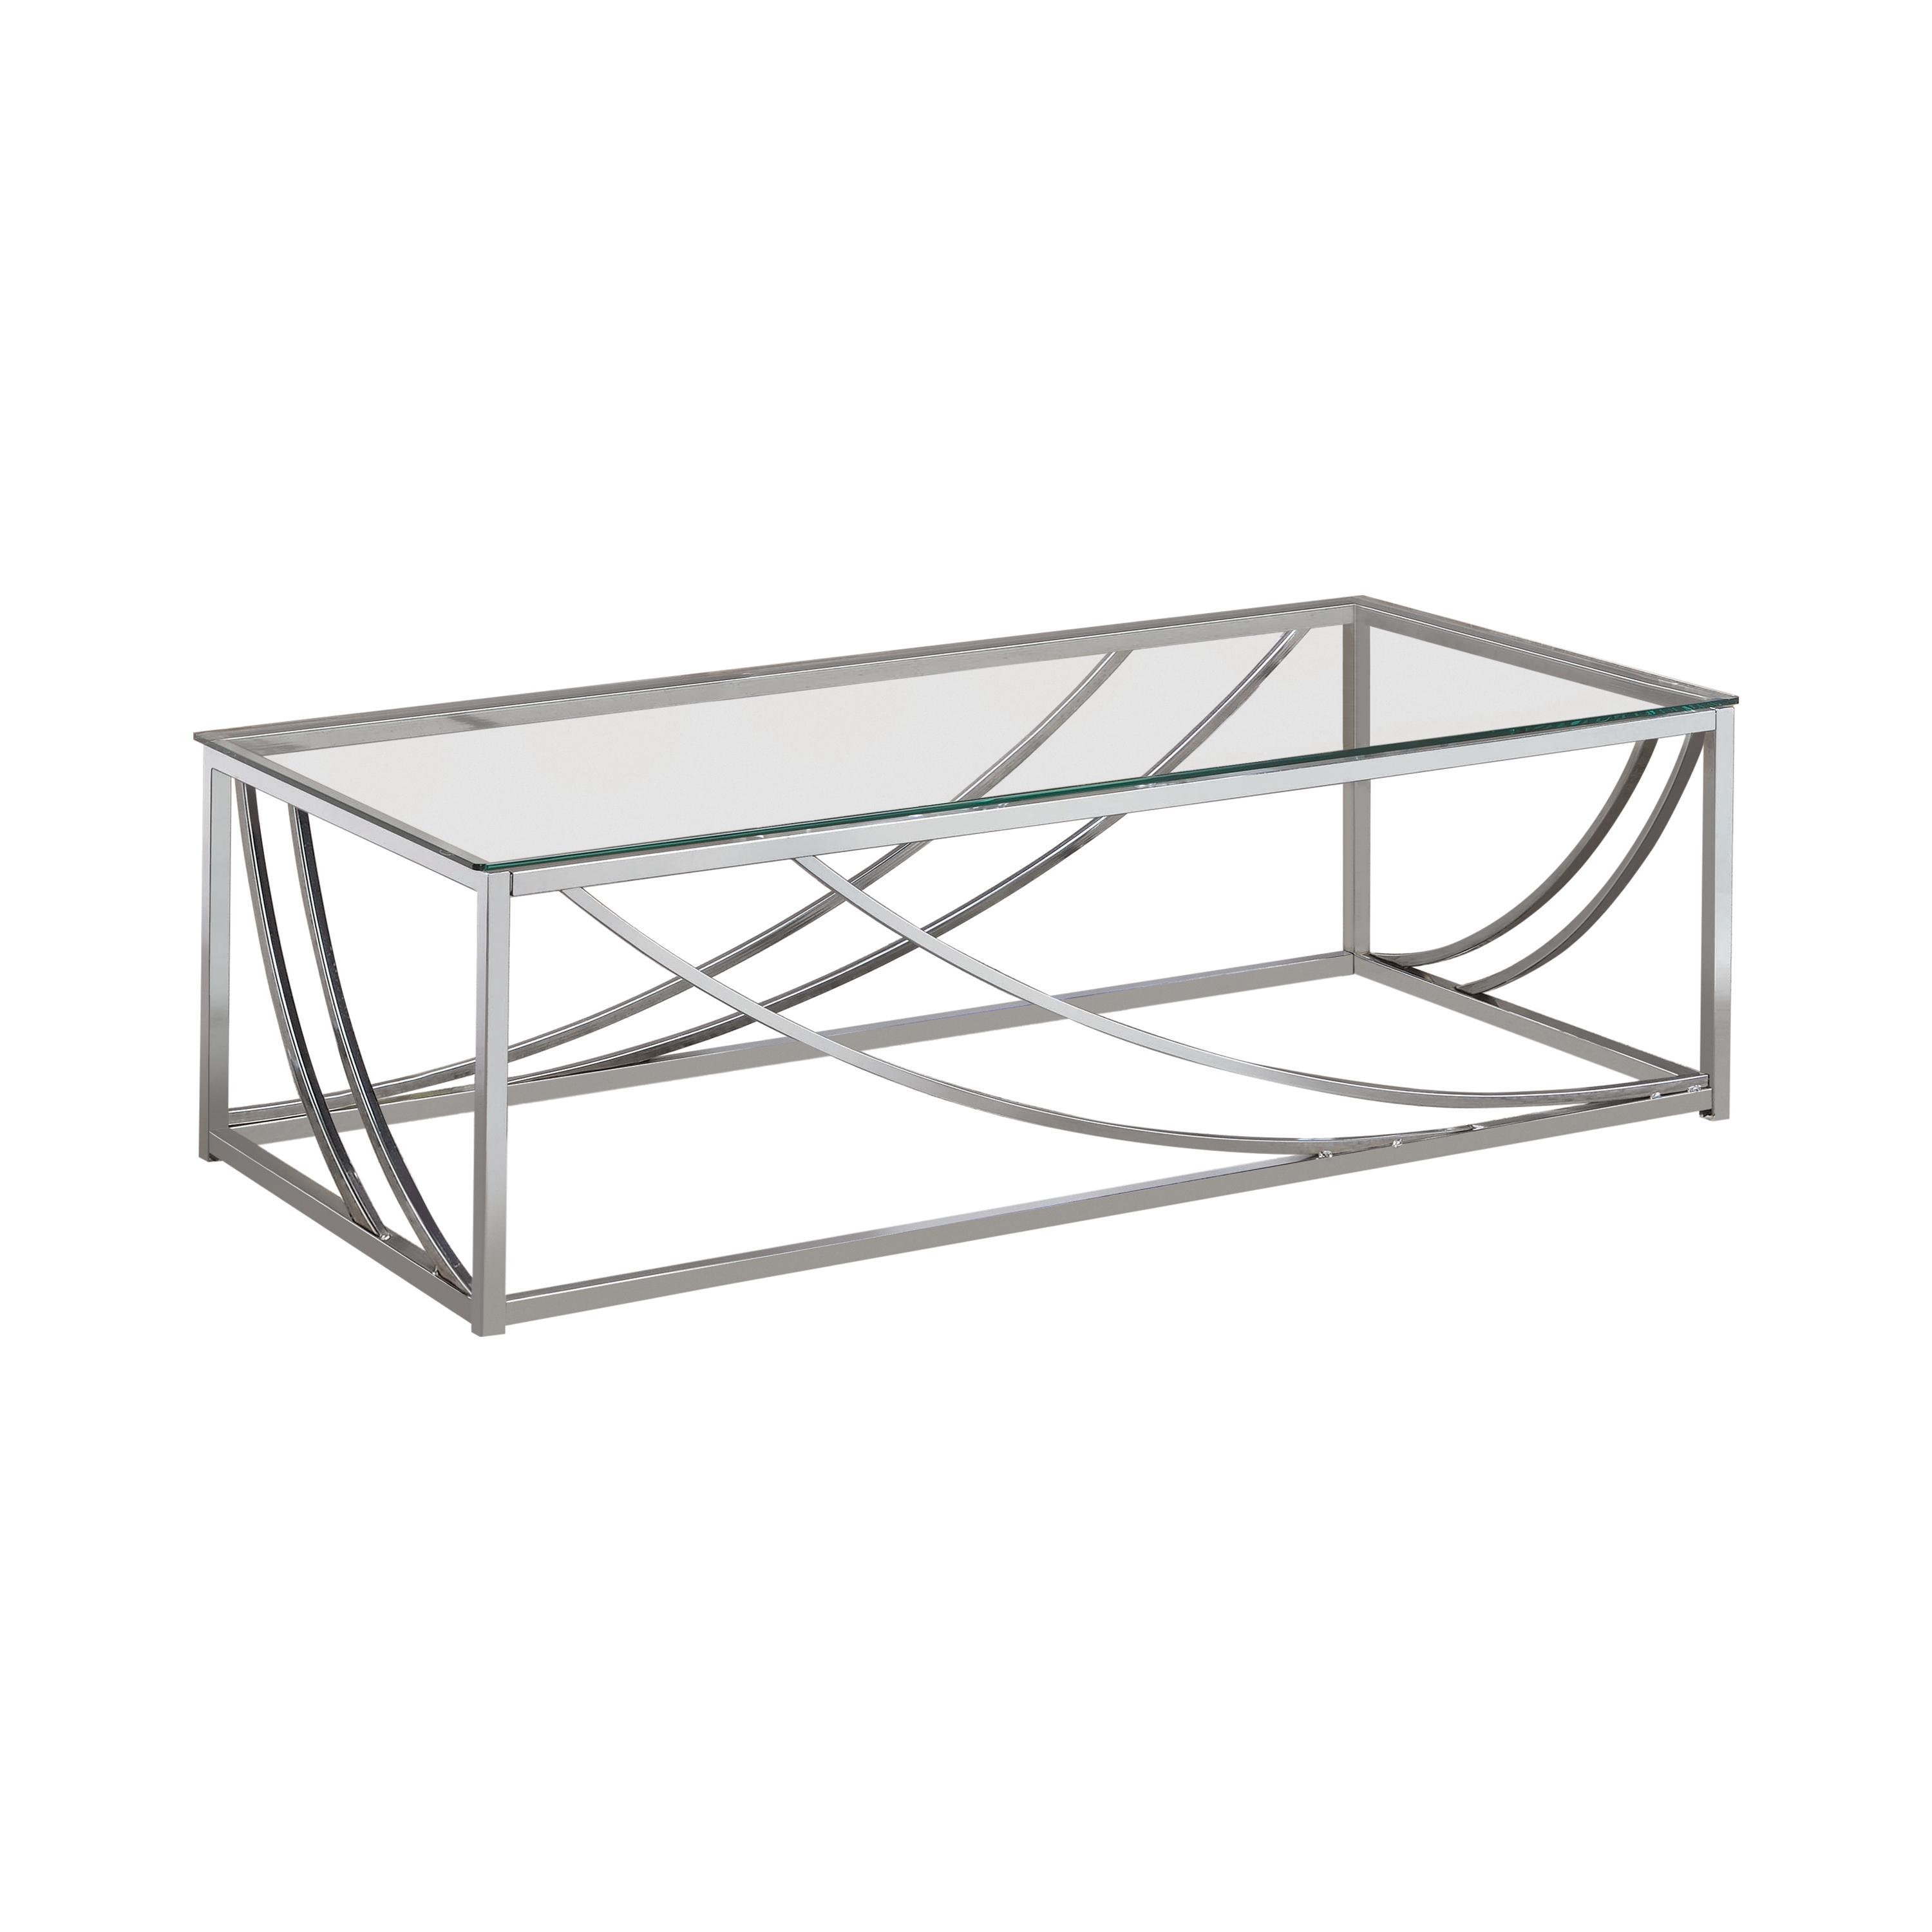 Contemporary Coffee Table 720498 720498 in Chrome 